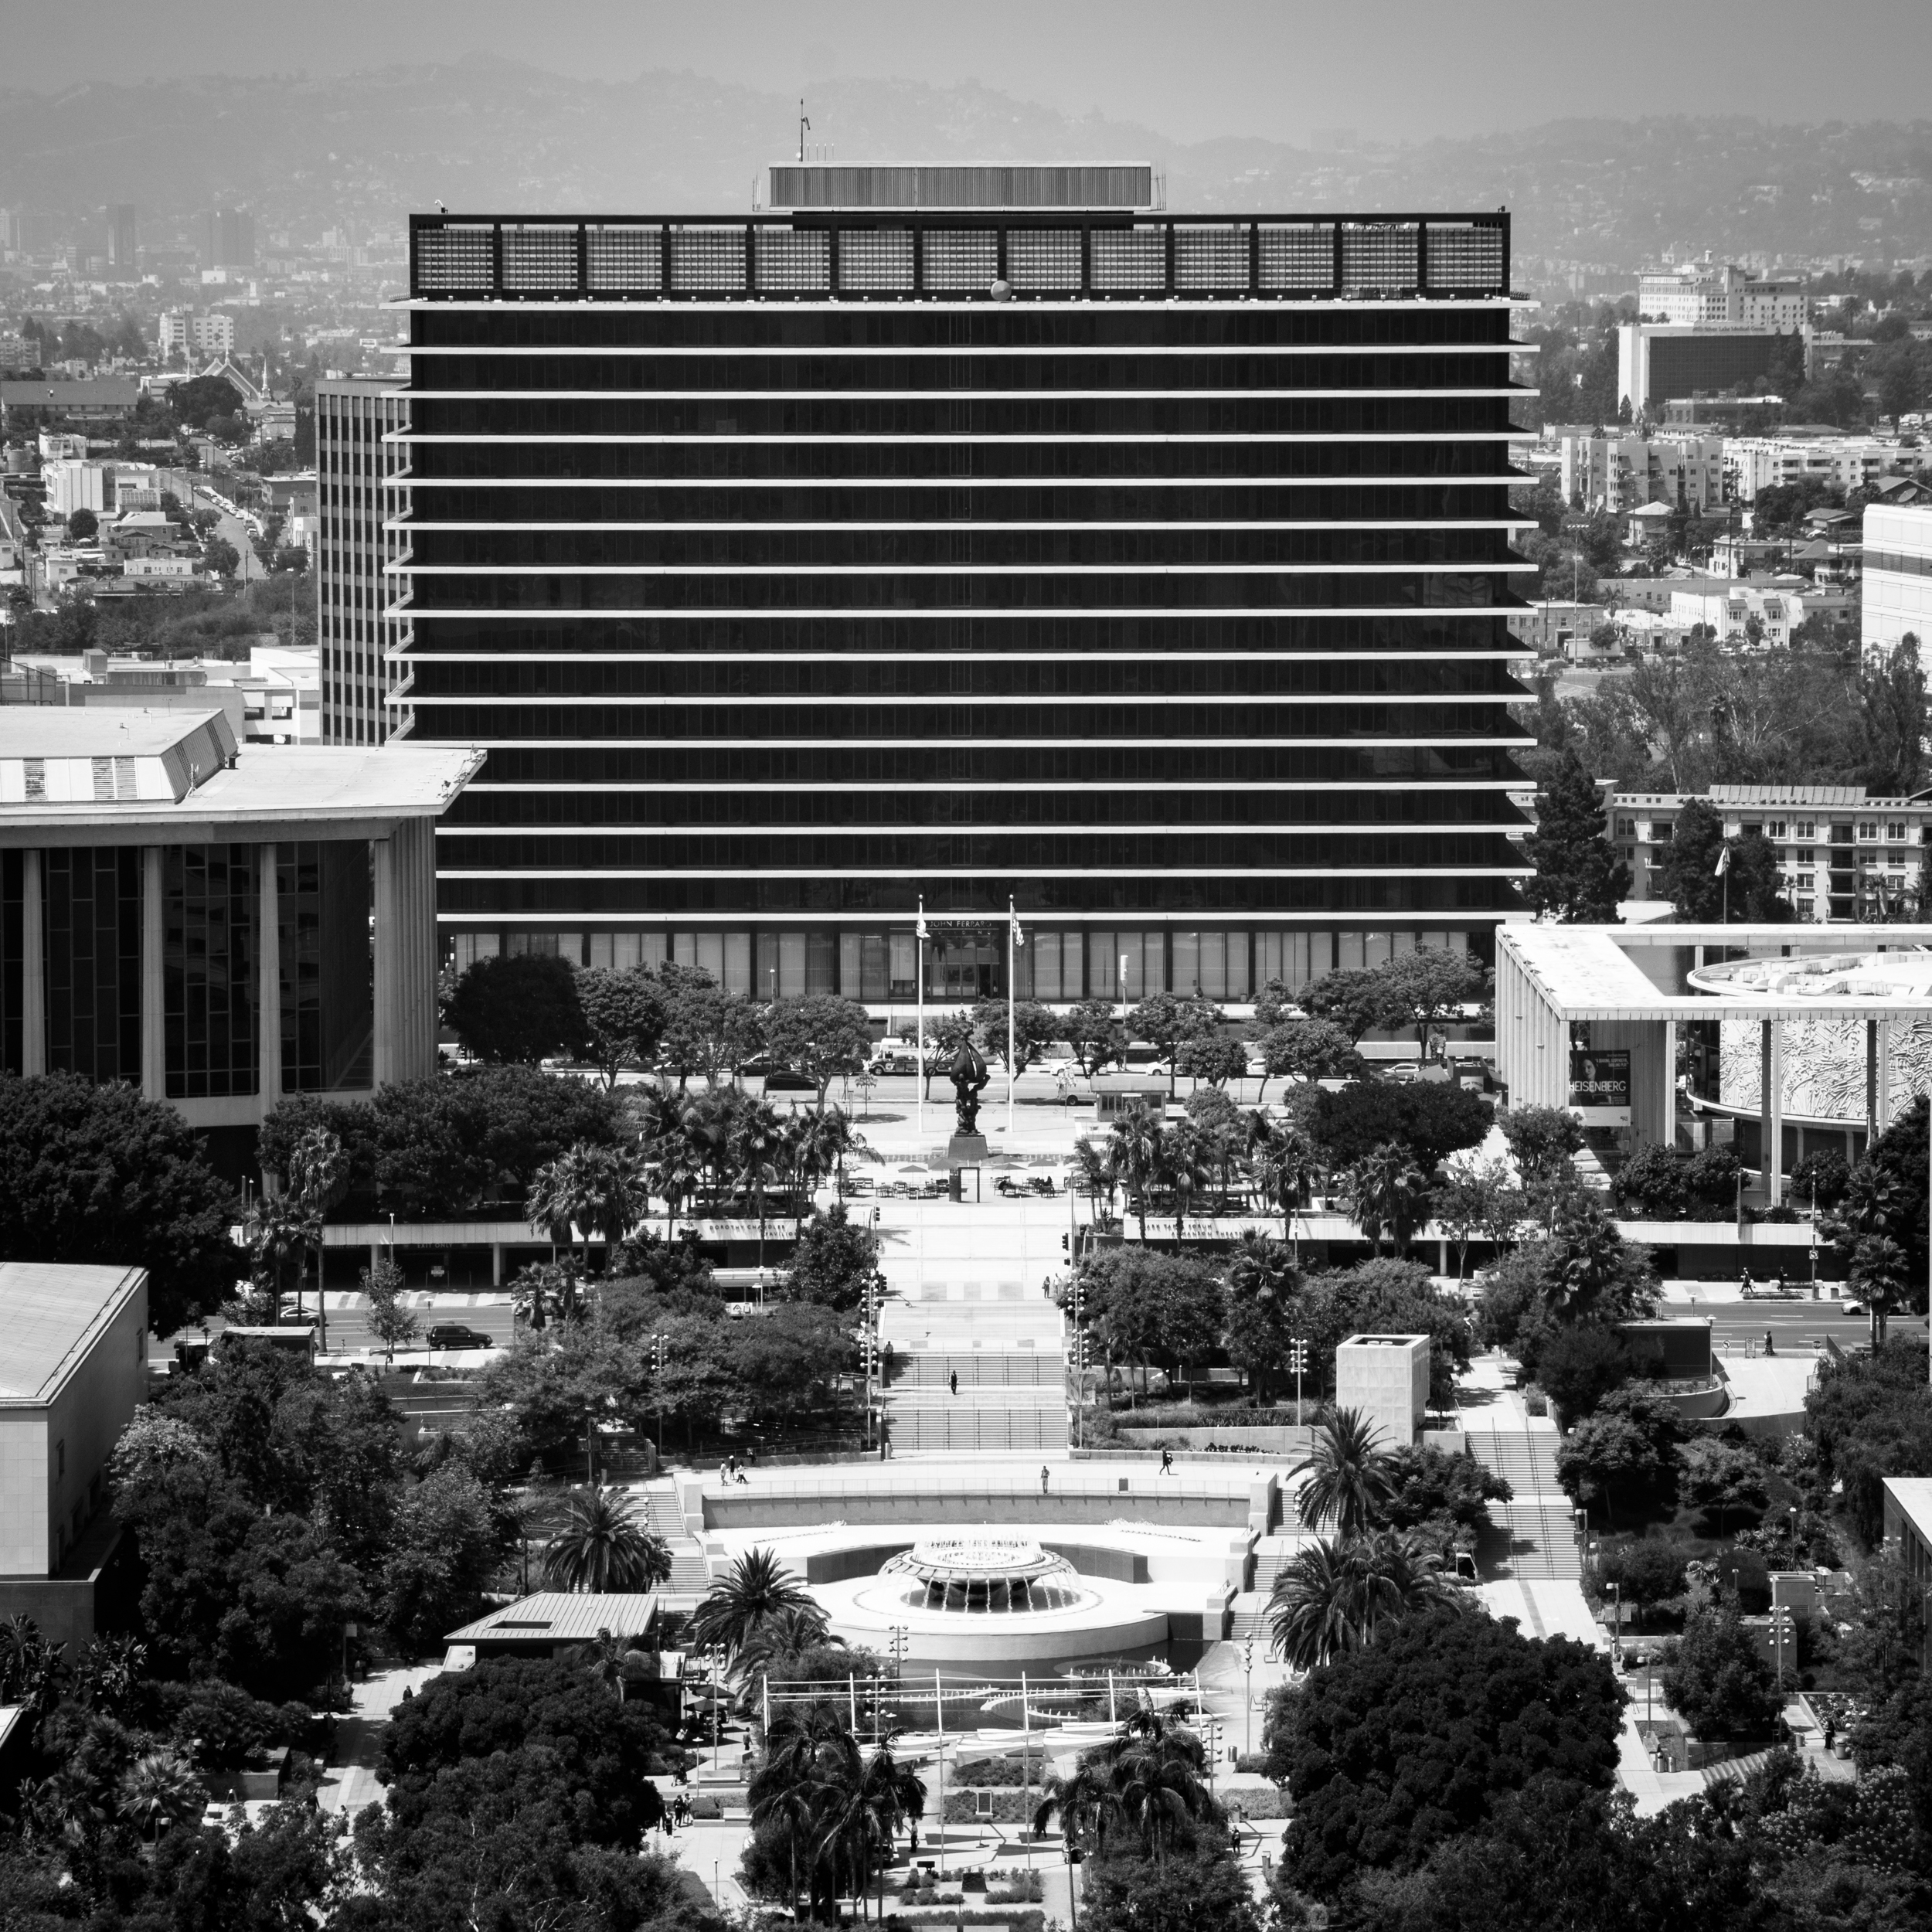 LOS ANGELES DEPARTMENT OF WATER AND POWER / THE JOHN FERRARO BUILDING